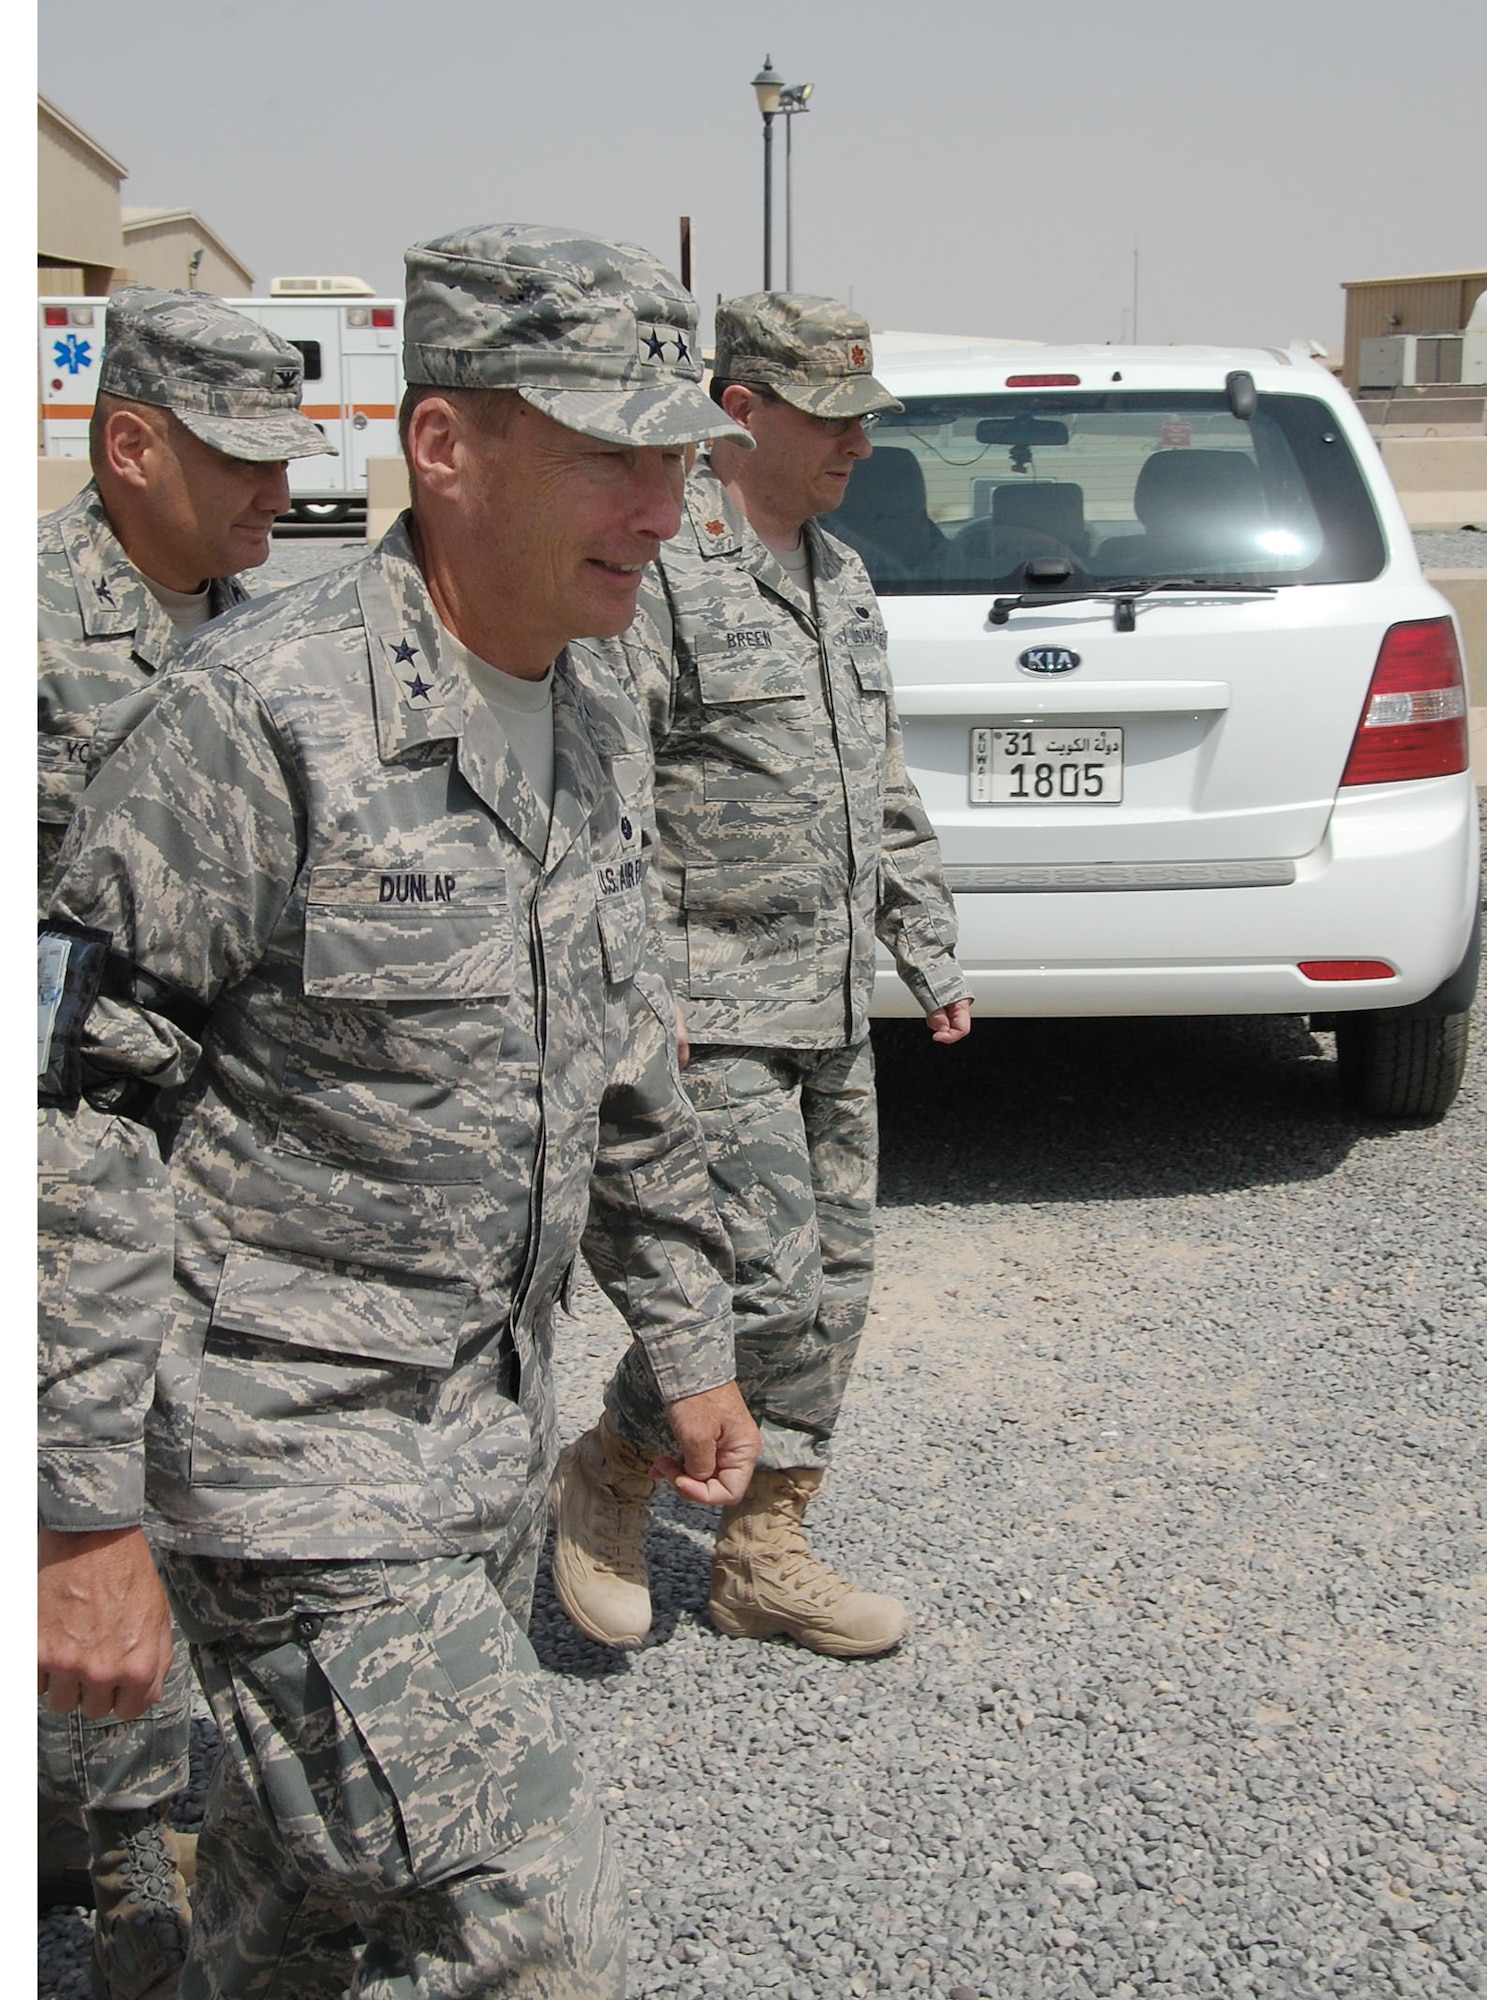 Maj. Gen. Charles J. Dunlap Jr., the Air Force deputy judge advocate general, toured the 386th Air Expeditionary Wing Aug. 18 as part of an eight-day visit to various deployed locations to inspect military justice operations. (U.S. Air Force photo/Staff Sgt. Shaun Emery) 